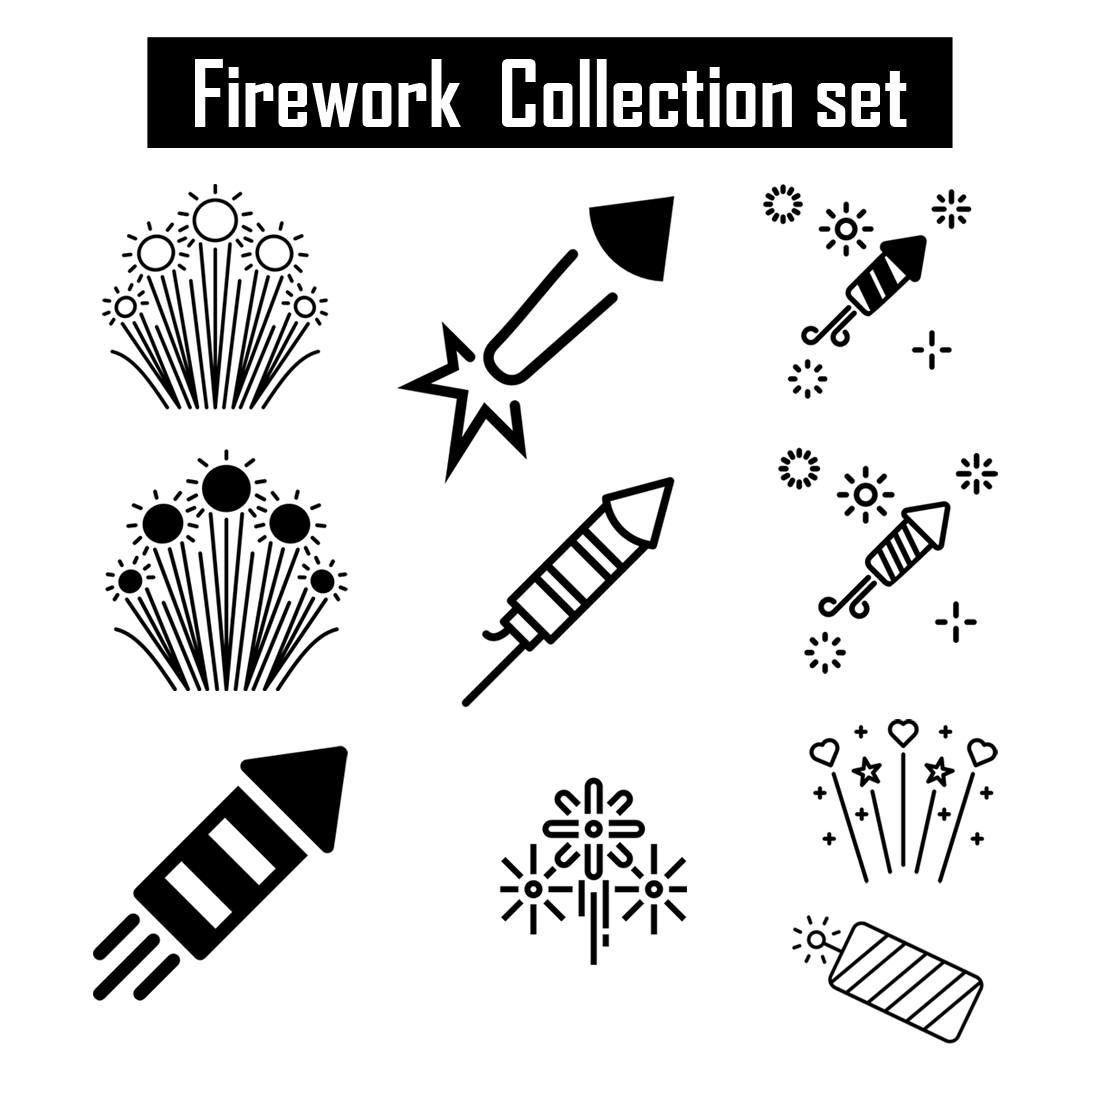 Preview firework black images.